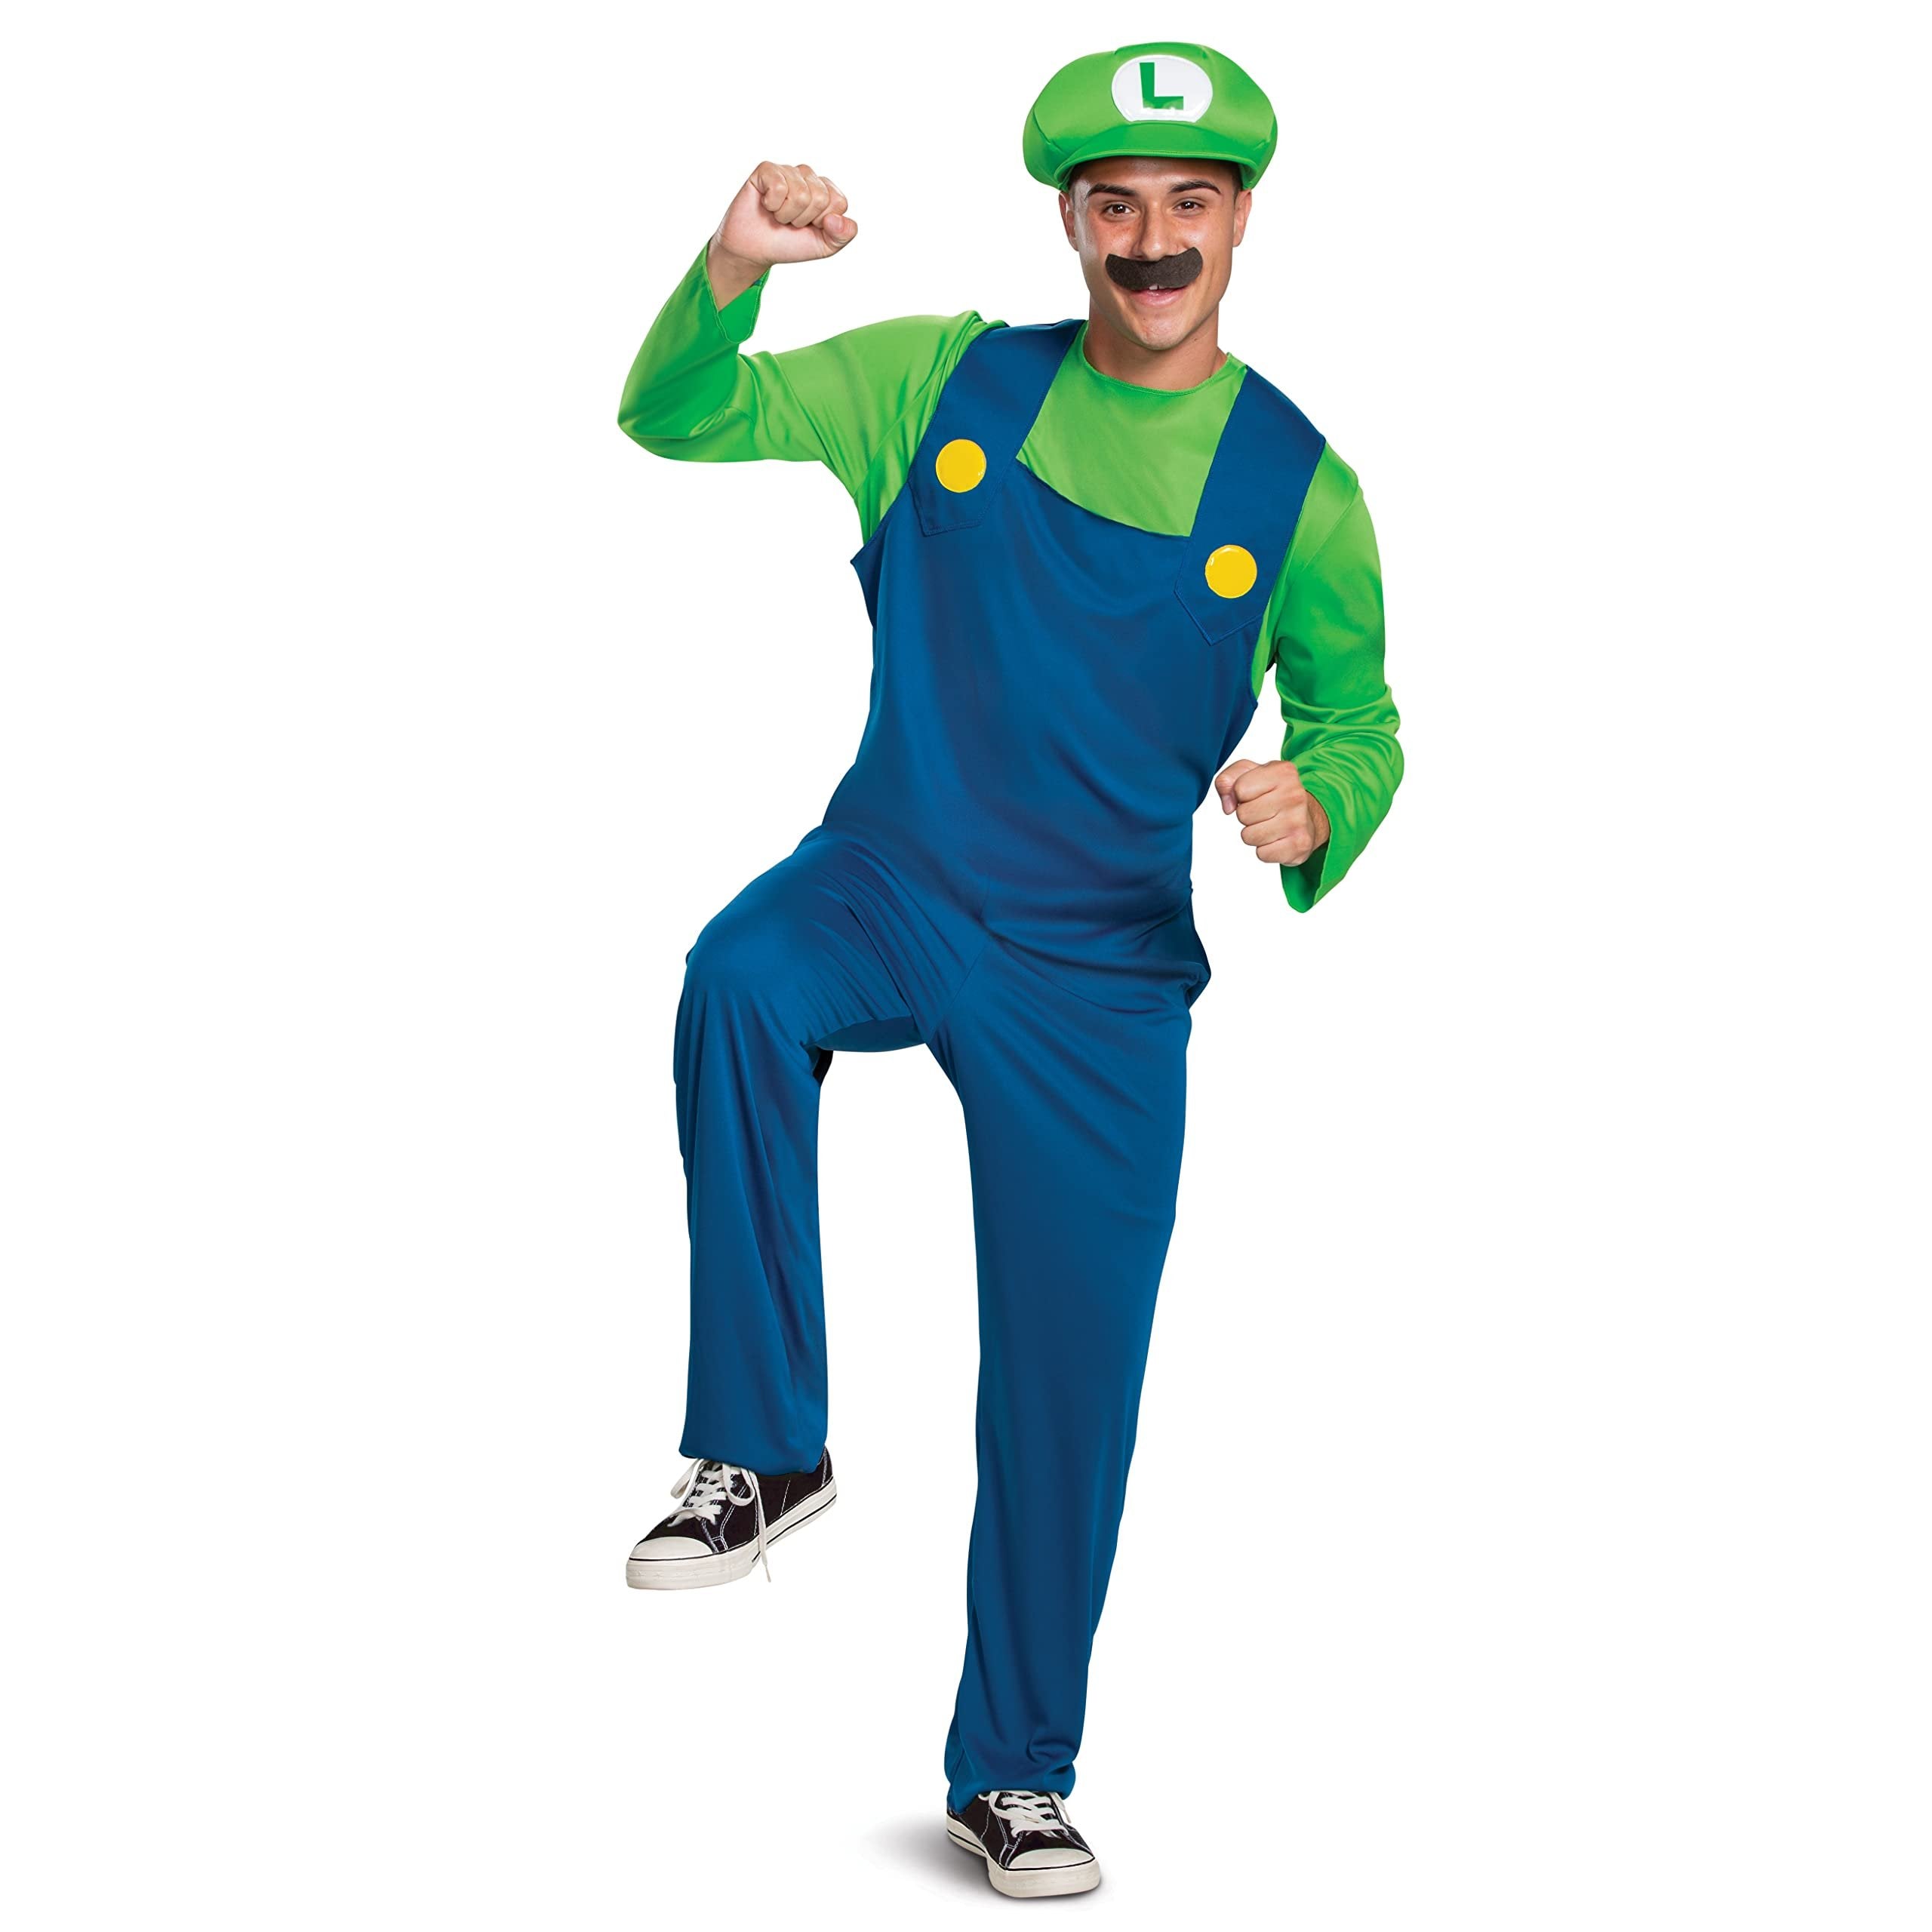 Official Nintendo Luigi Costume XL (42-46) with Hat & Mustache - Free Shipping & Returns